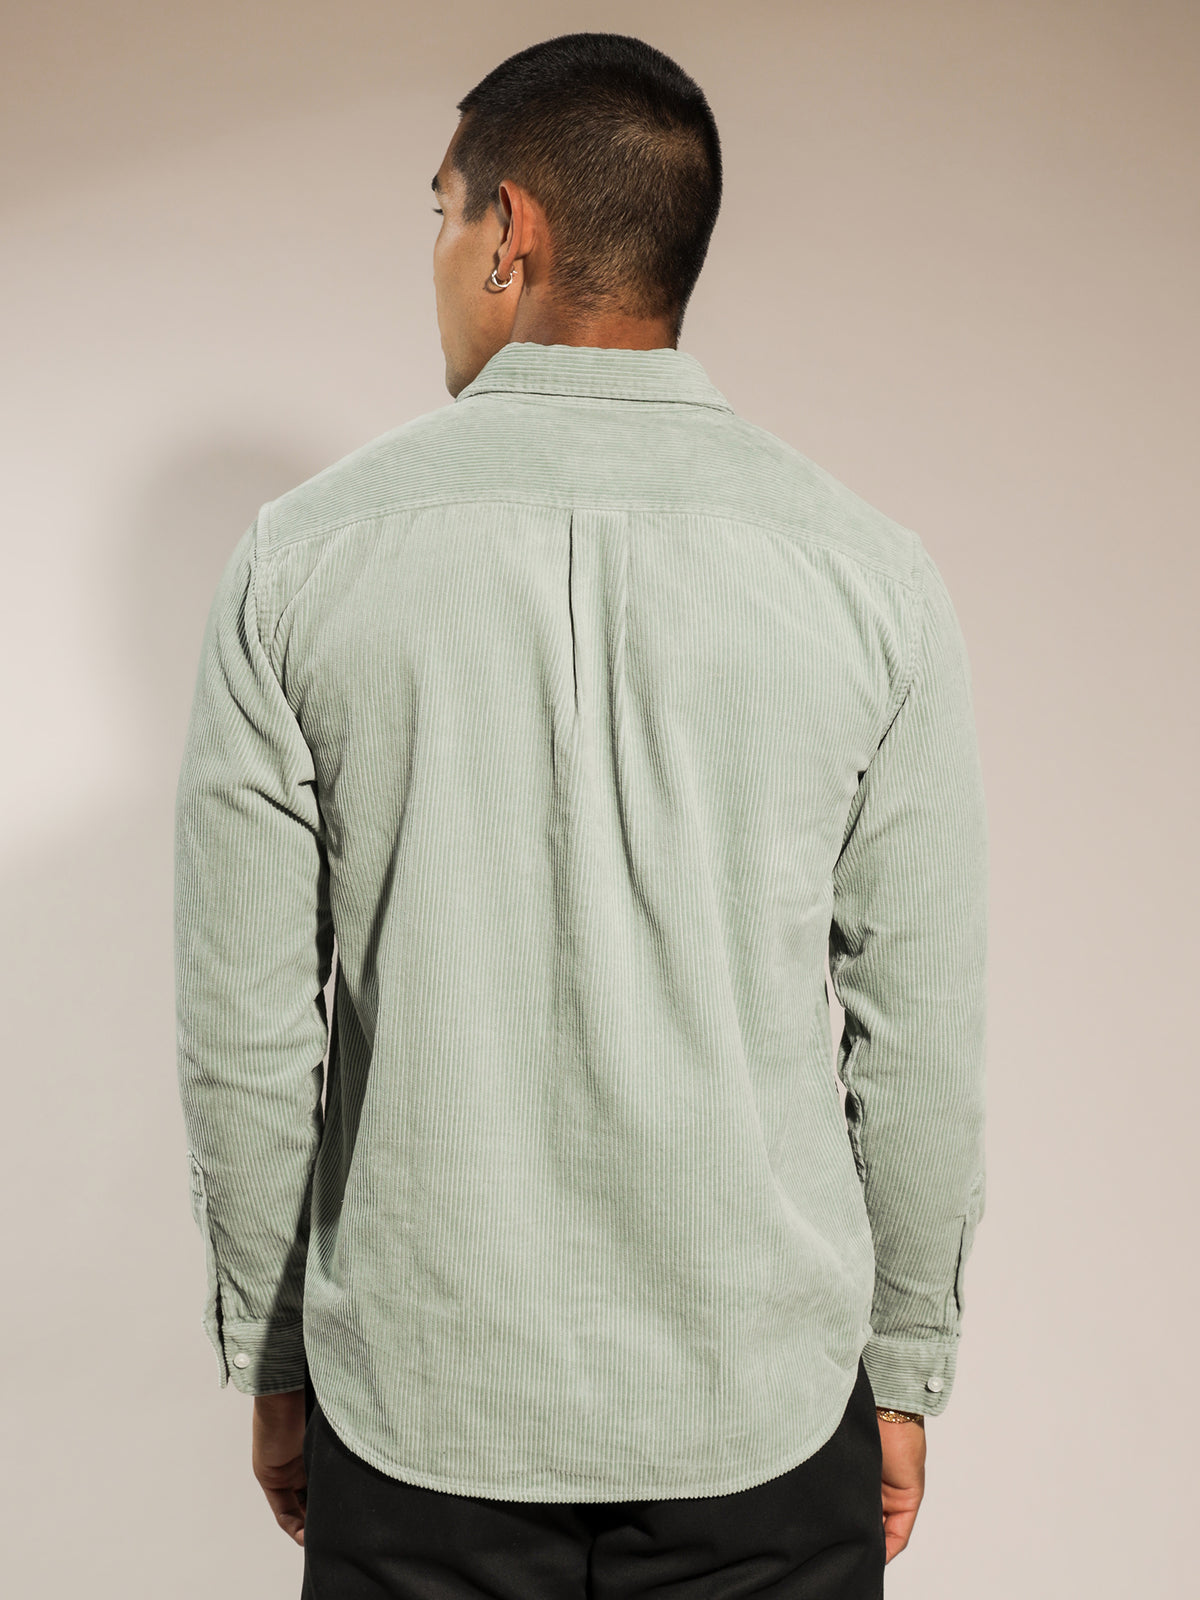 Maddison Corduroy Long Sleeve T-Shirt in Frosted Green